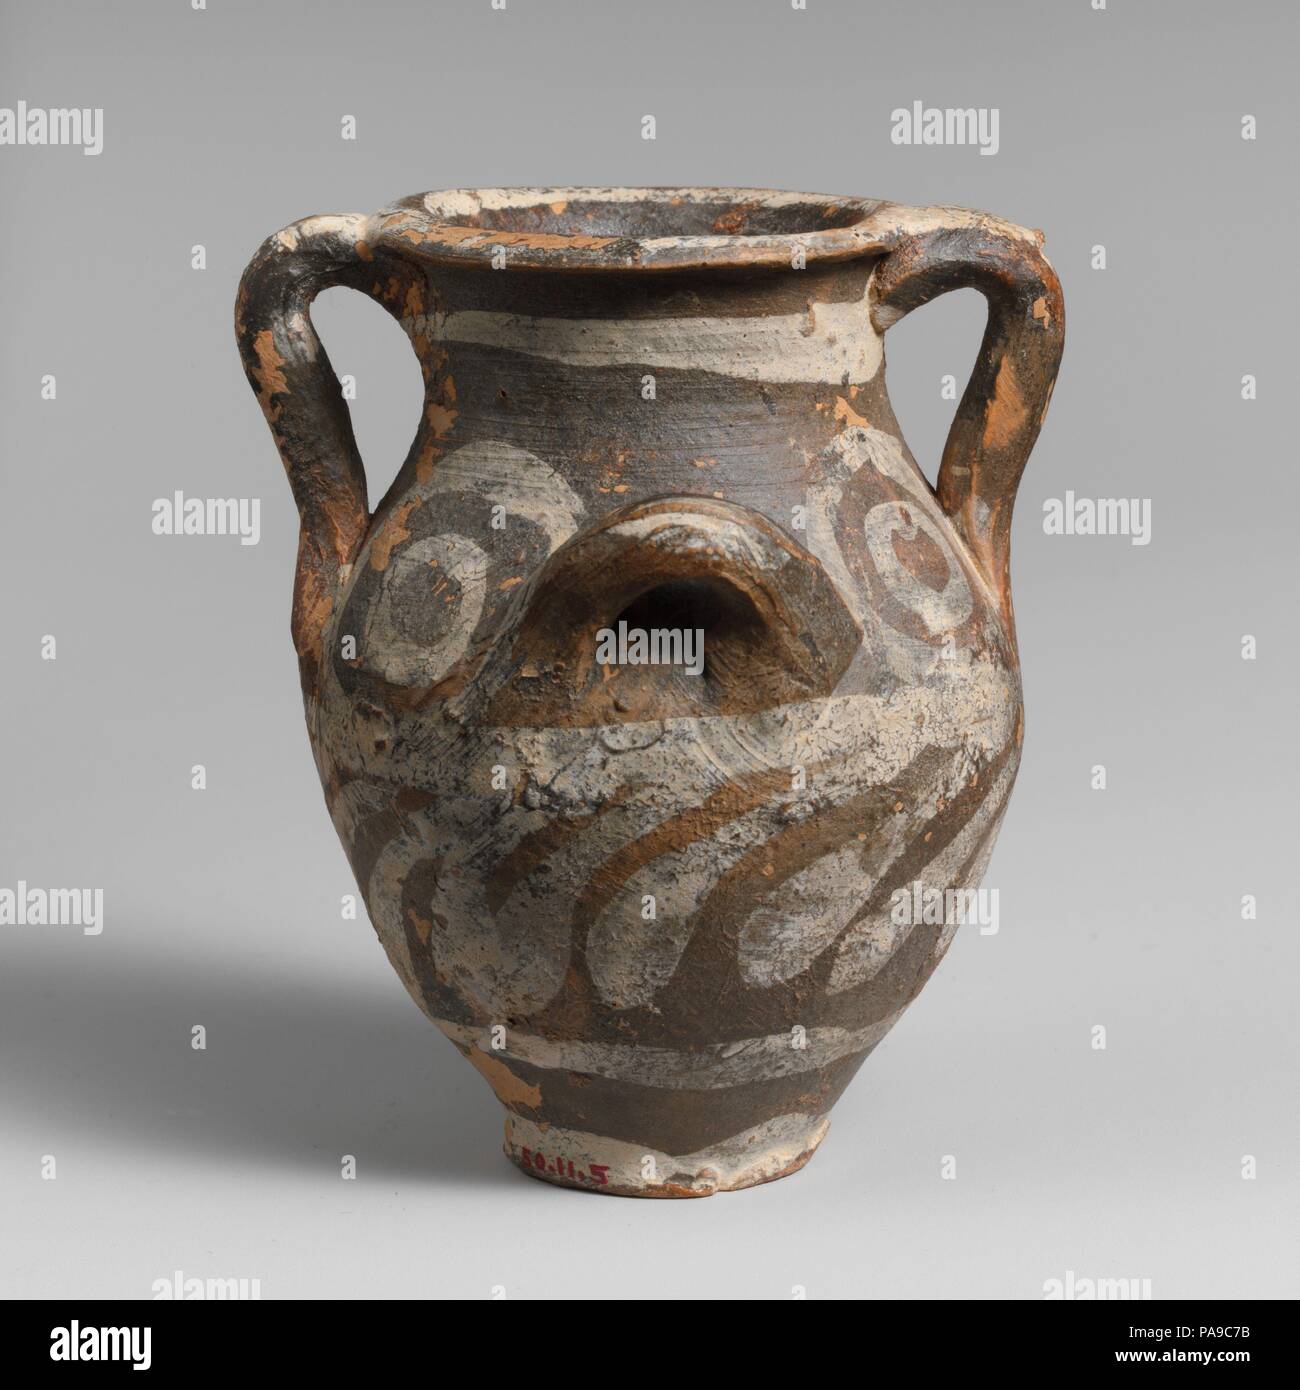 Small terracotta jar with four handles. Culture: Minoan. Dimensions: H. 2 7/8 in. (7.3 cm). Date: ca. 1800-1750 B.C..  Handled pot with black and white decoration. Museum: Metropolitan Museum of Art, New York, USA. Stock Photo